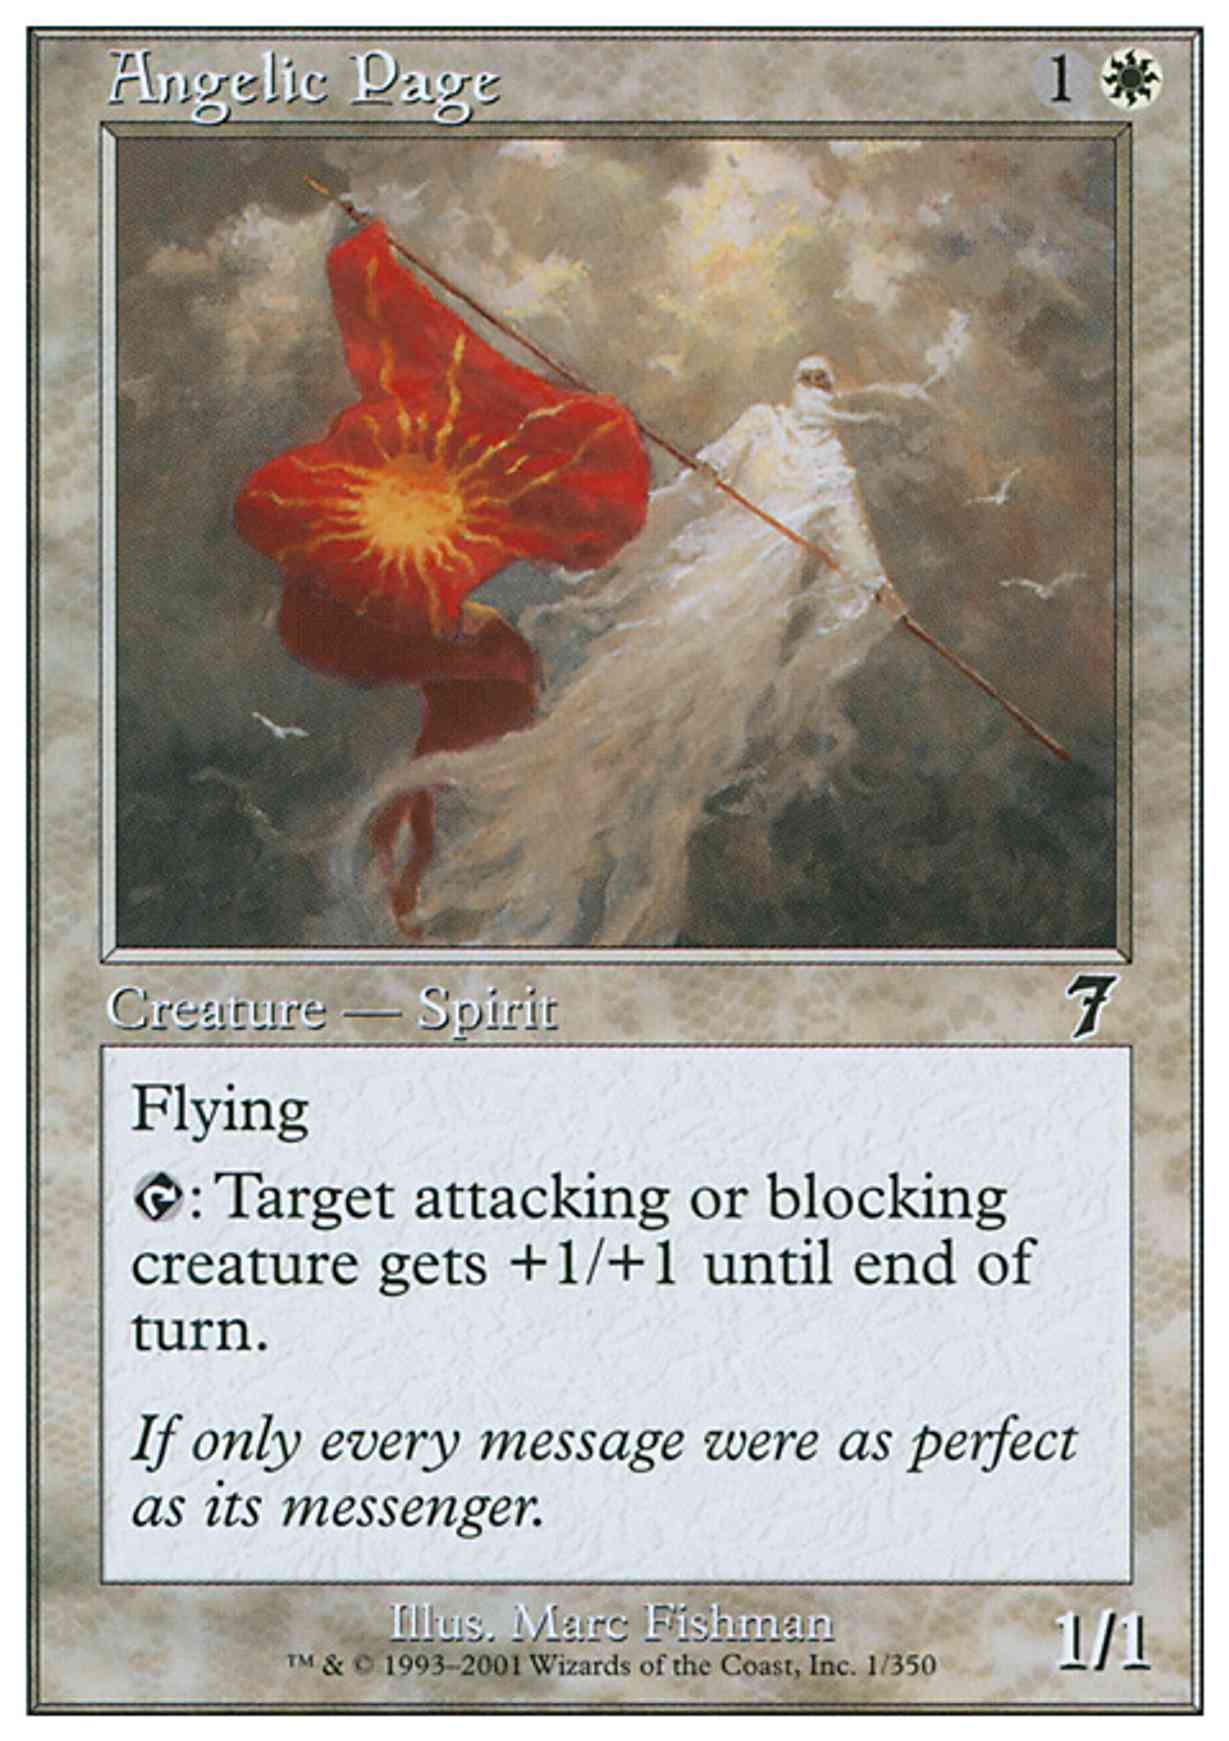 Angelic Page magic card front